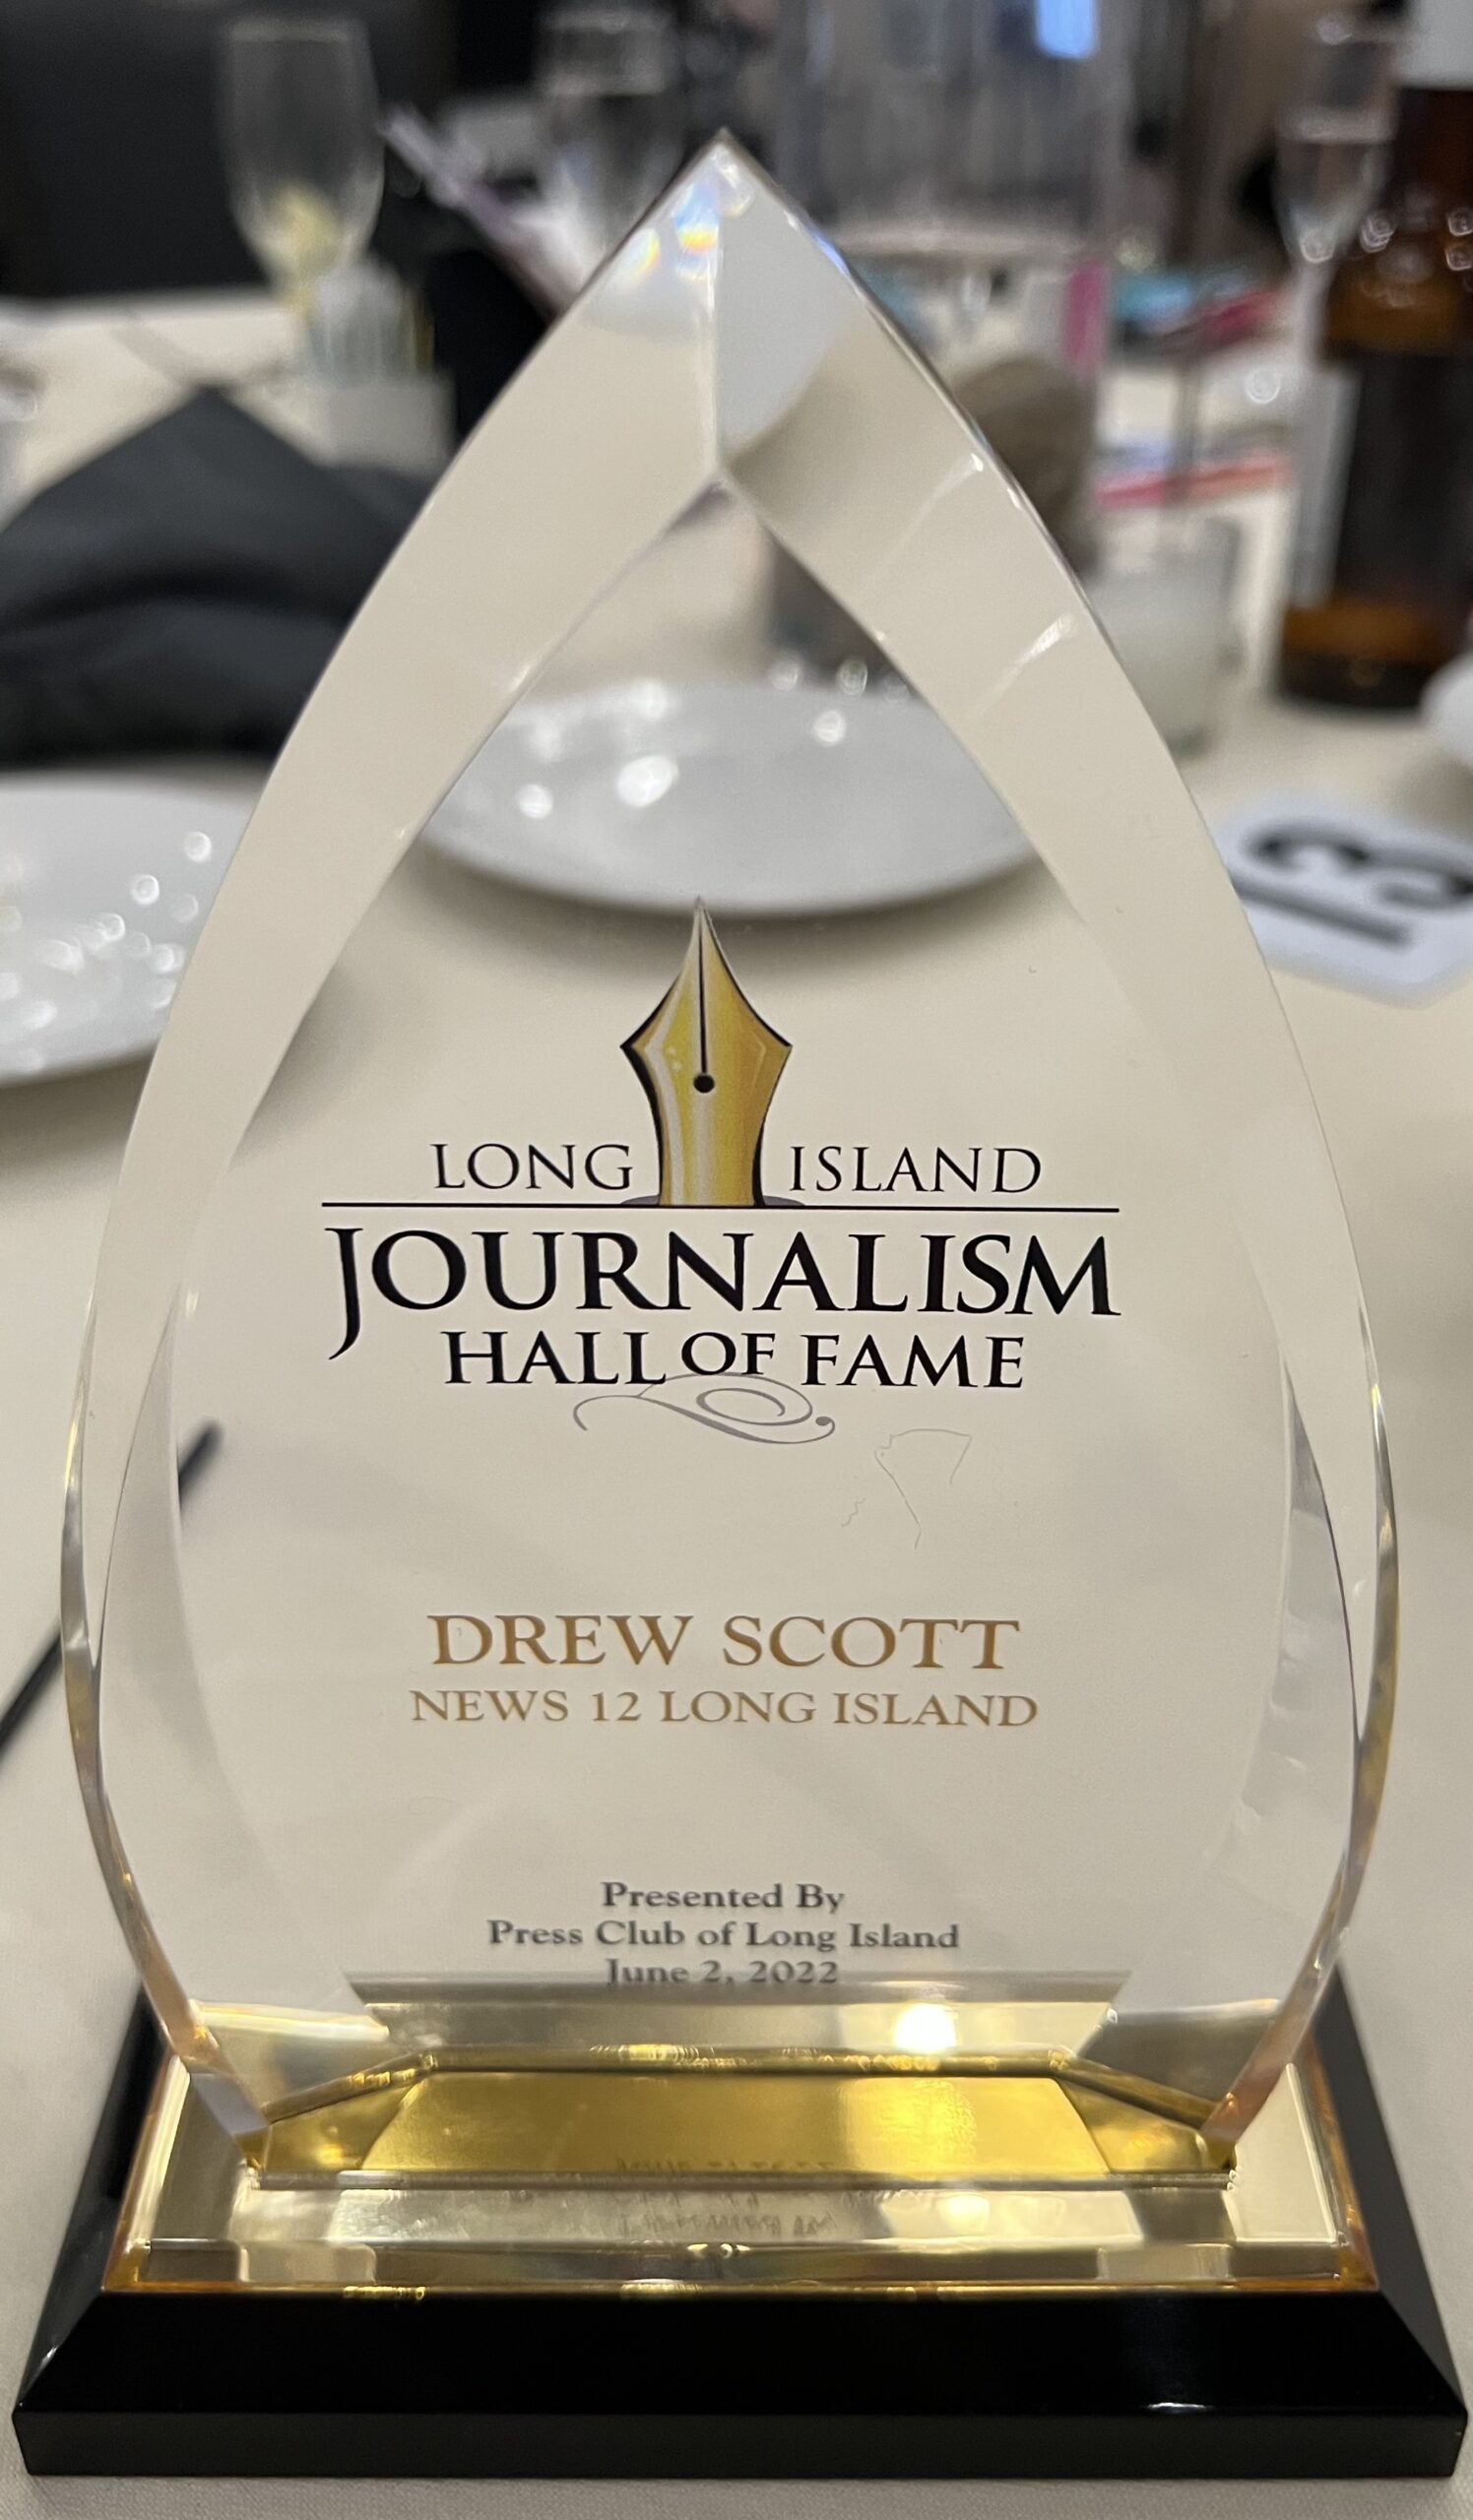 The Press Club of Long Island inducted Drew Scott into its Long Island Journalism Hall of Fame.